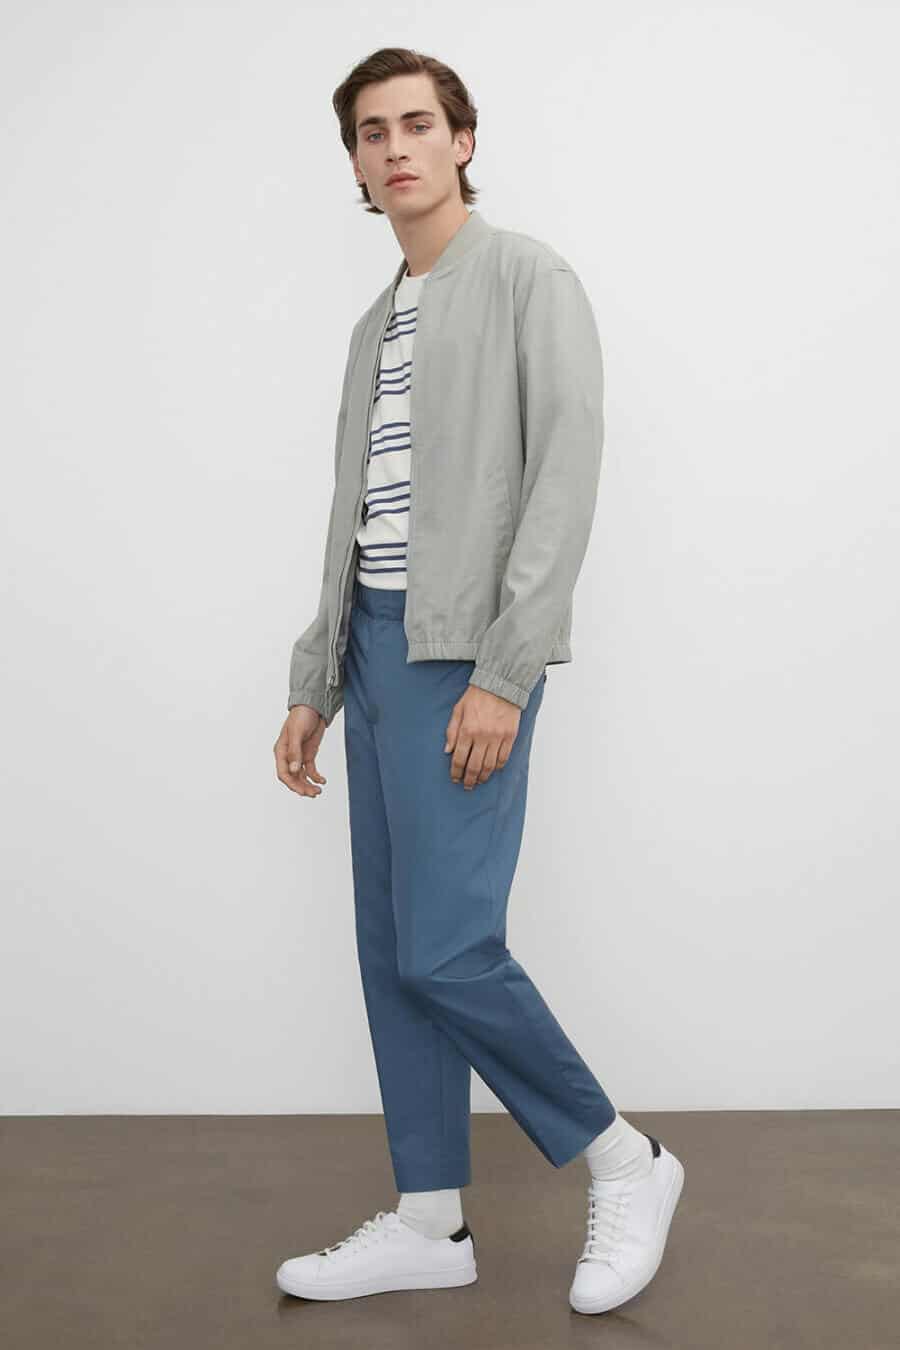 Men's transitional spring style outfit - striped t-shirt, bomber jacket and chinos